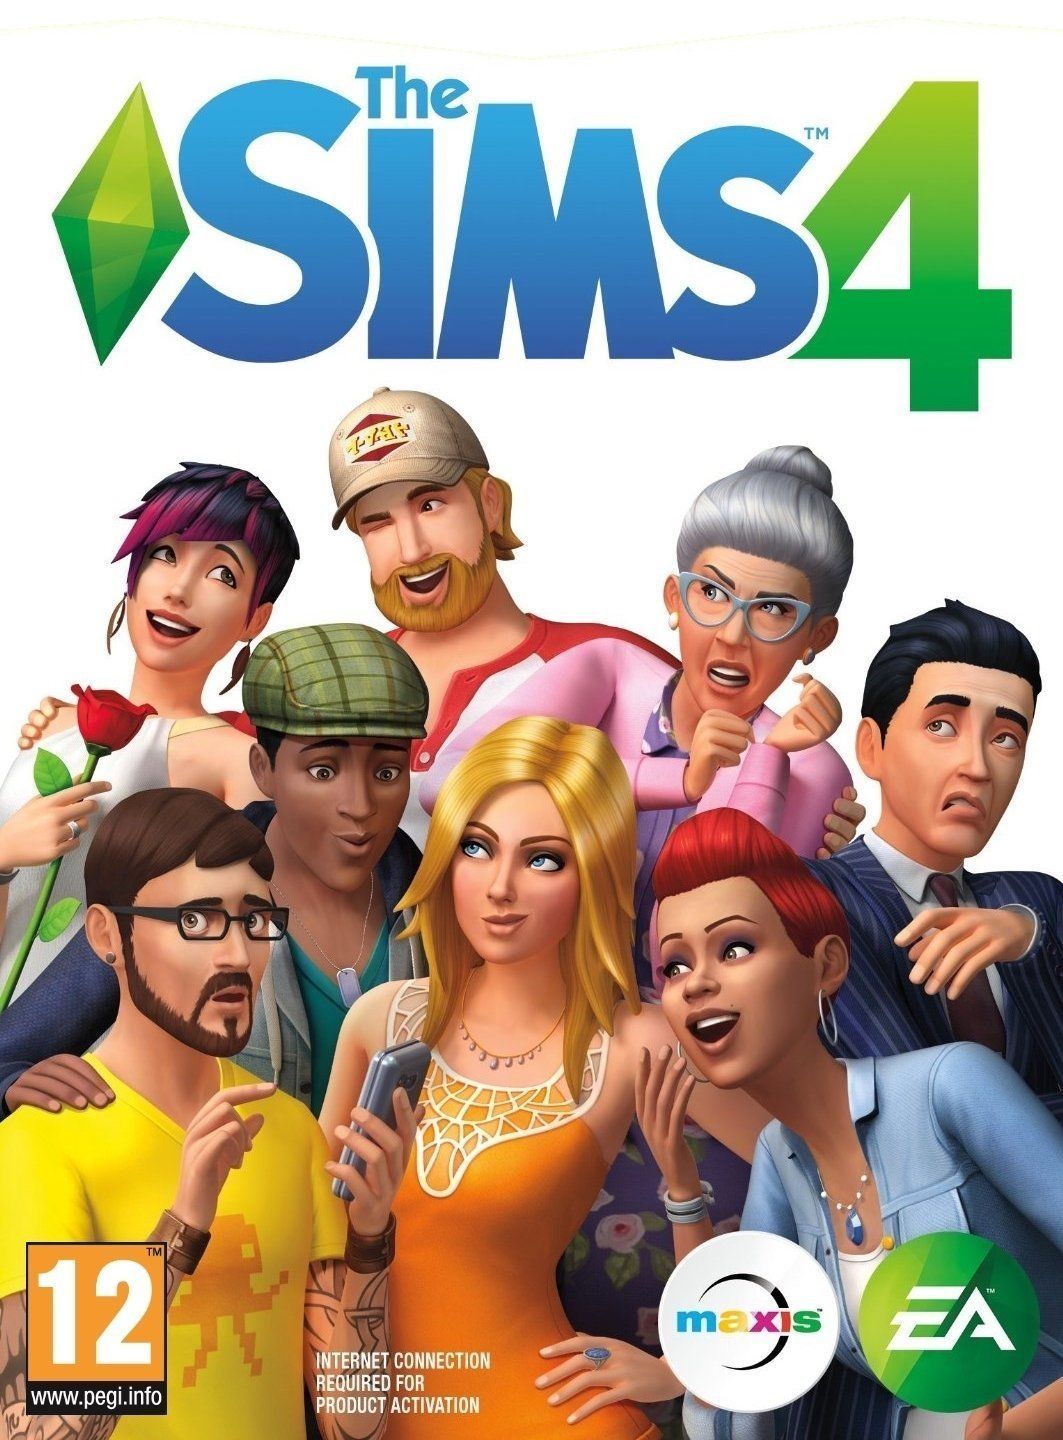 SIMS 4 FULL GAME PC/MAC BEST PRICE ON WHOLE EBAY DOWNLOAD!!!!!!!!!!!!!